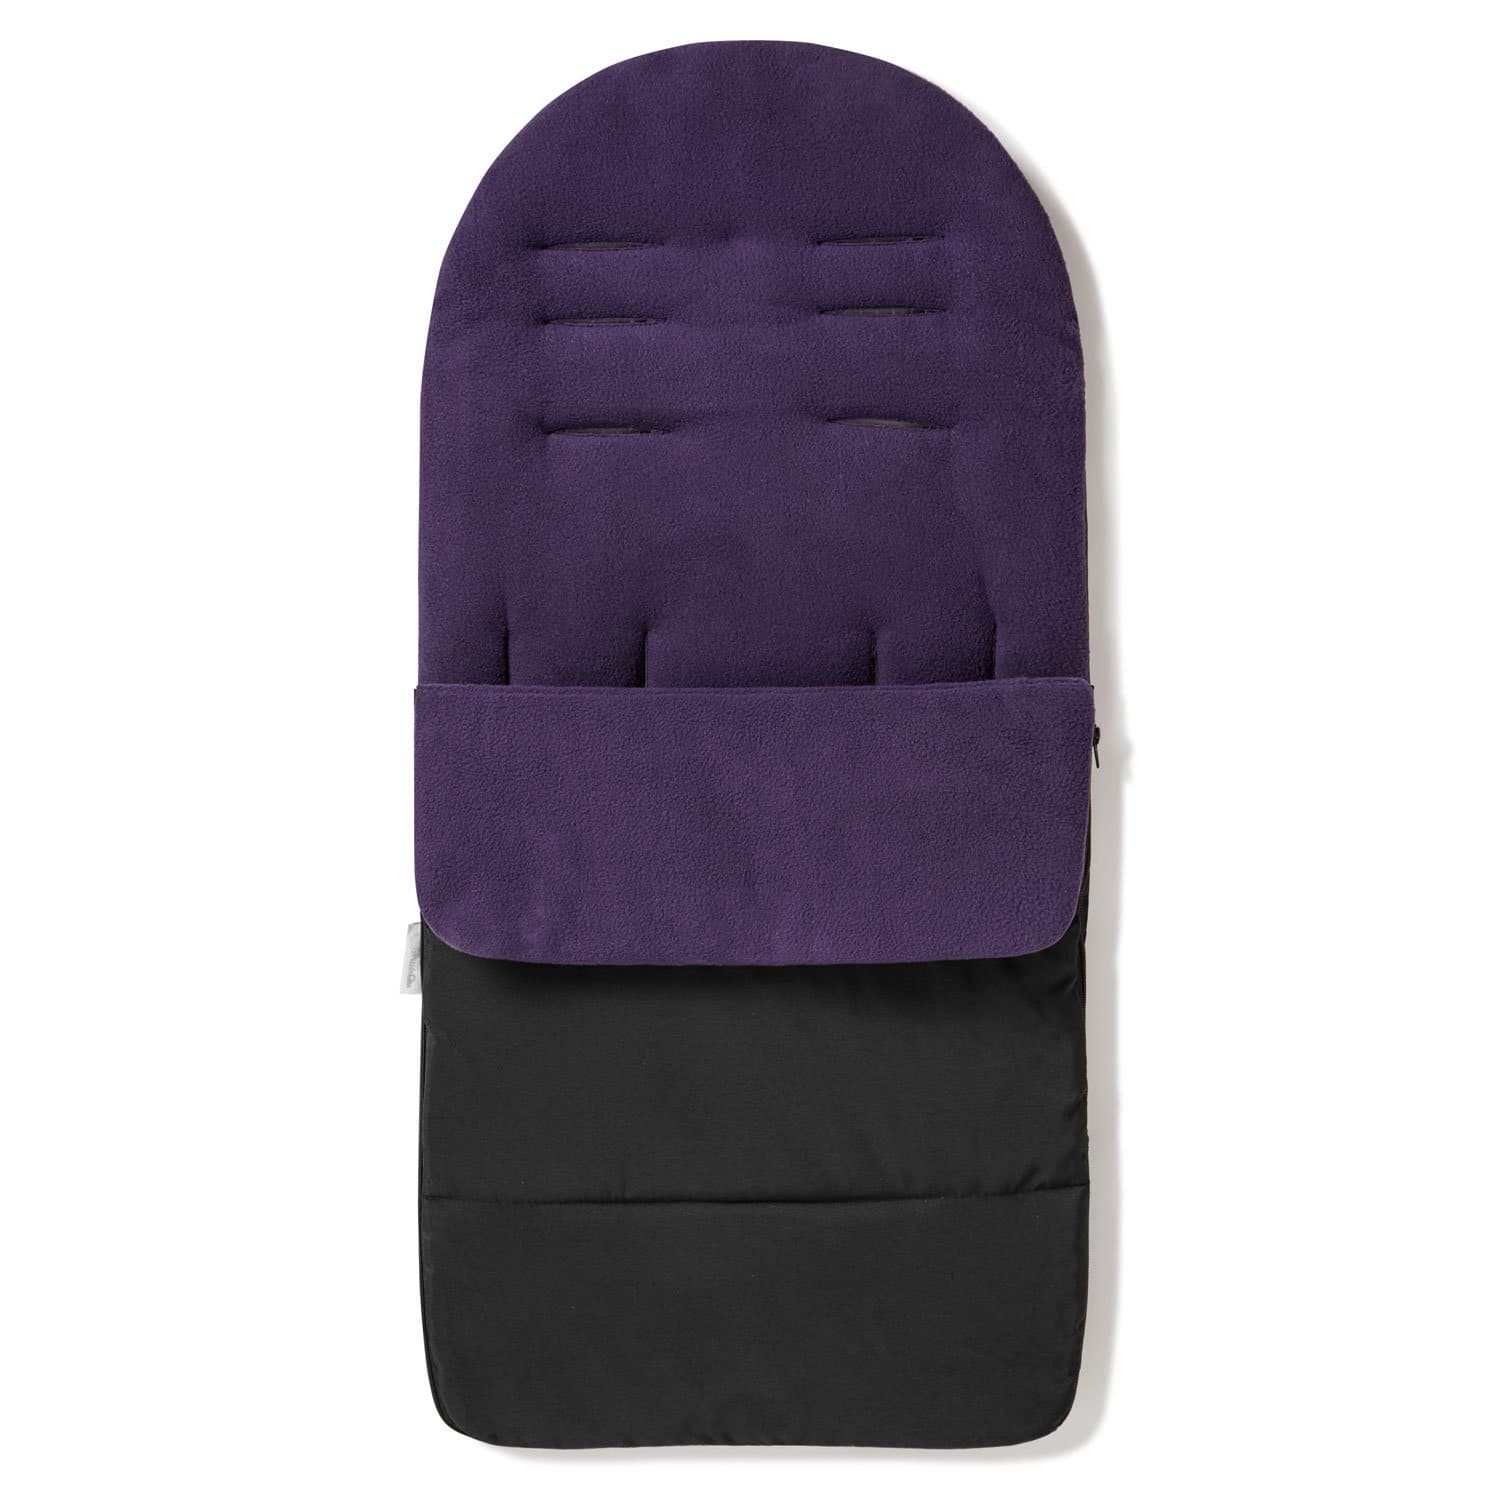 Premium Footmuff / Cosy Toes Compatible with Bugaboo - Plum Purple / Fits All Models | For Your Little One